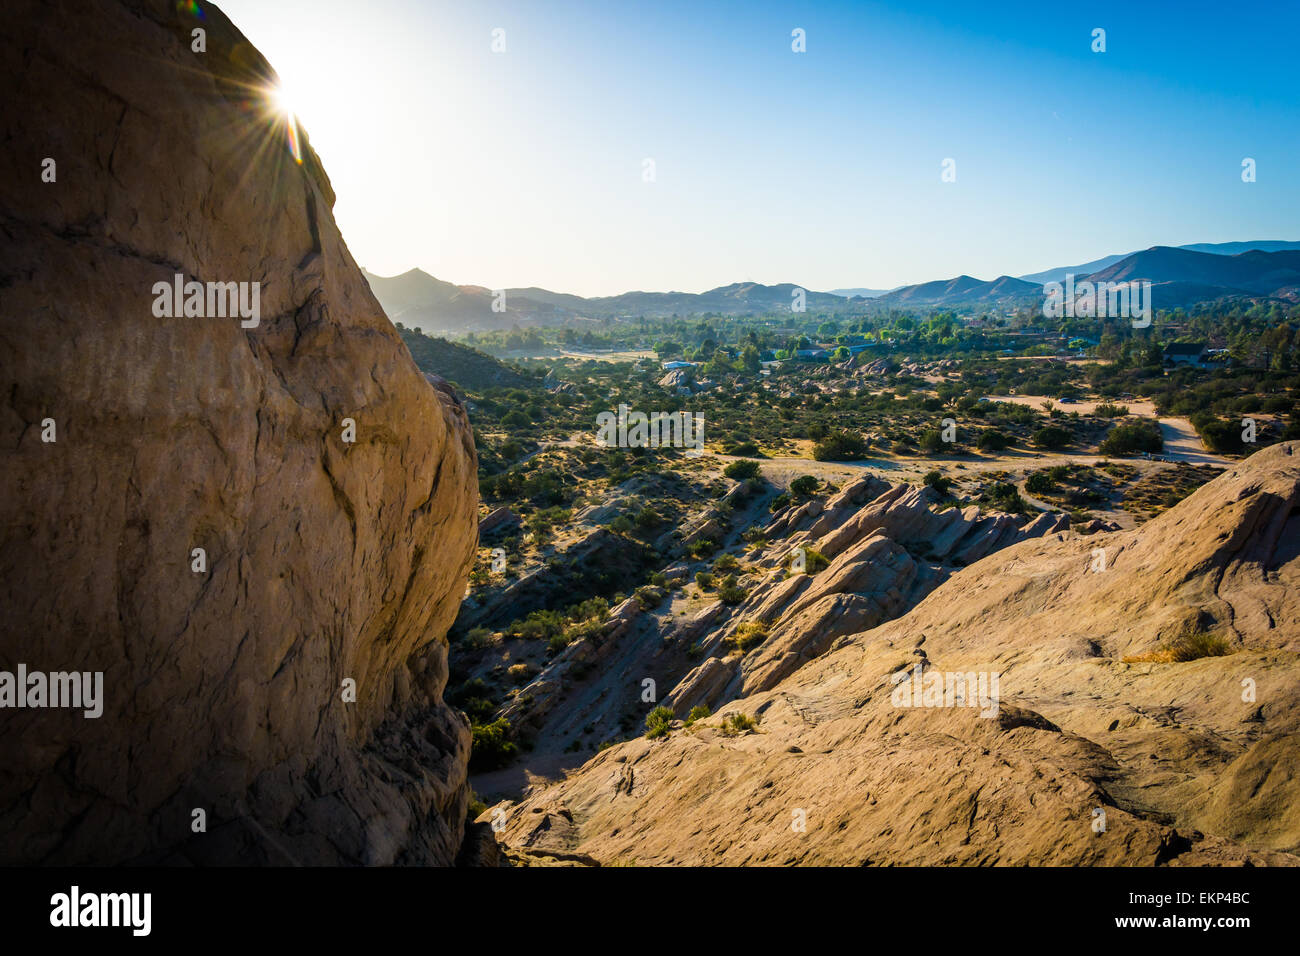 Rocks and view at Vasquez Rocks County Park, in Agua Dulce, California. Stock Photo